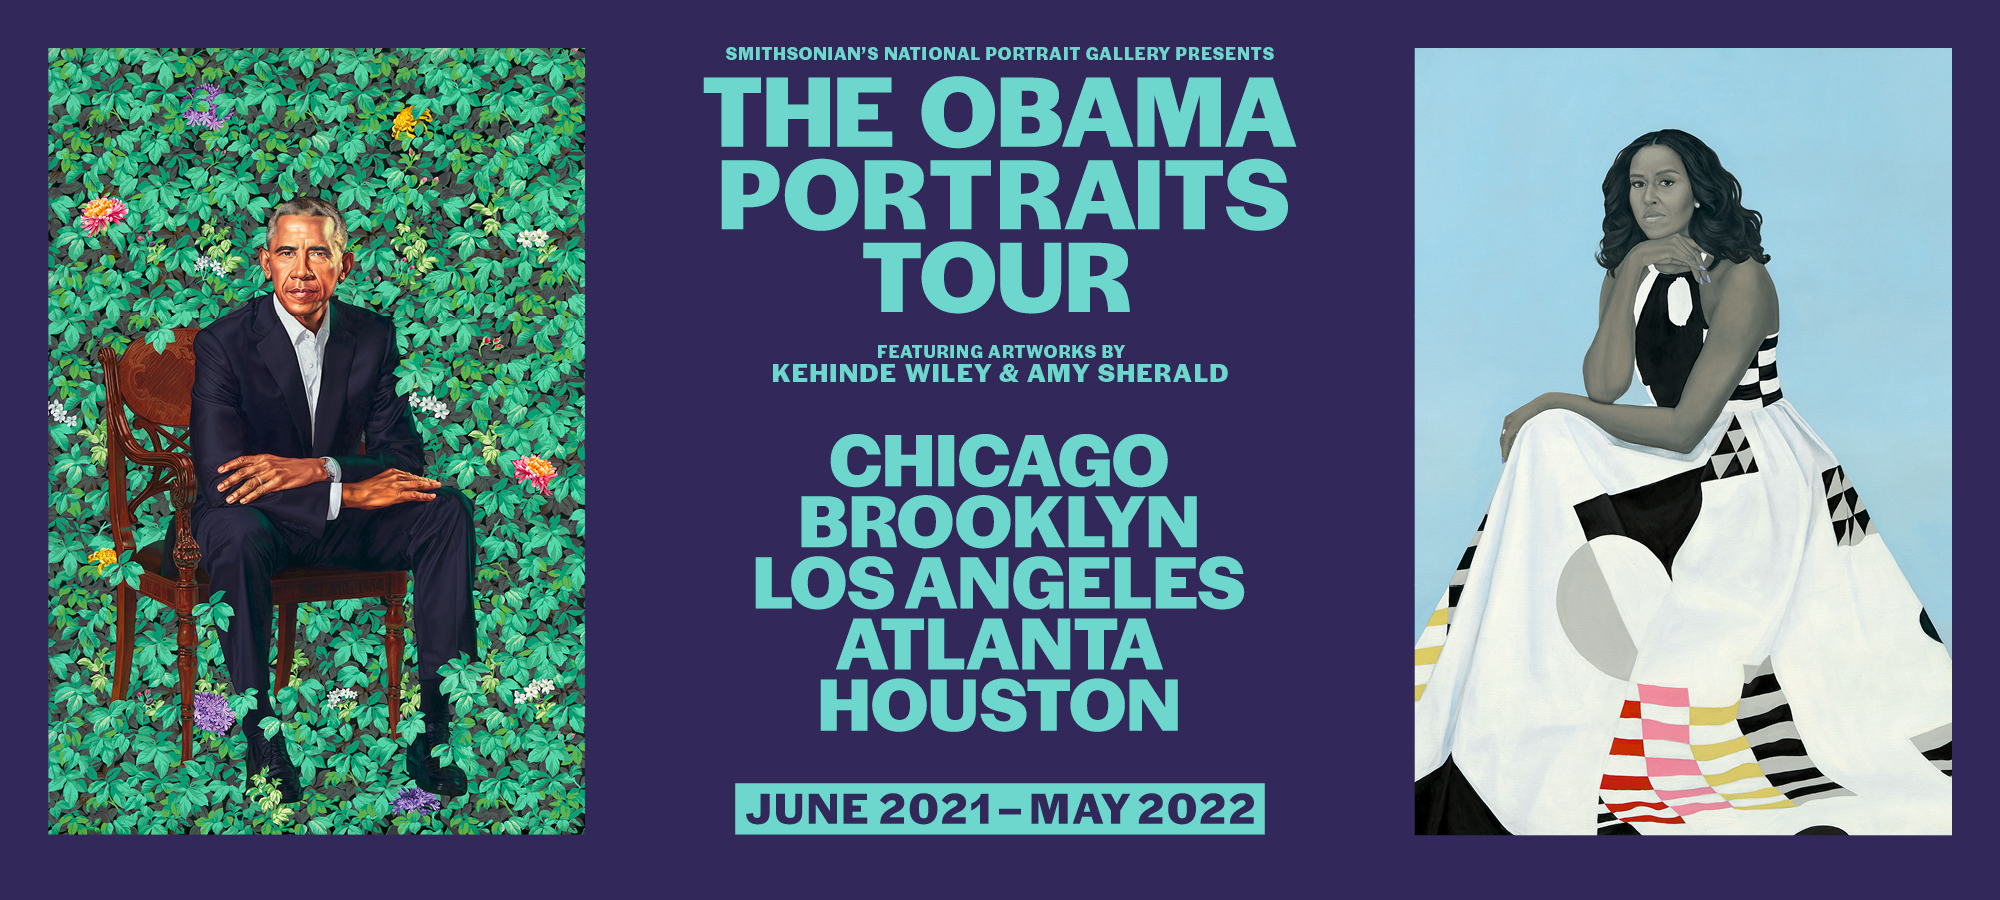 Preview image for Smithsonian’s National Portrait Gallery Prepares for “The Obama Portraits Tour”  press release